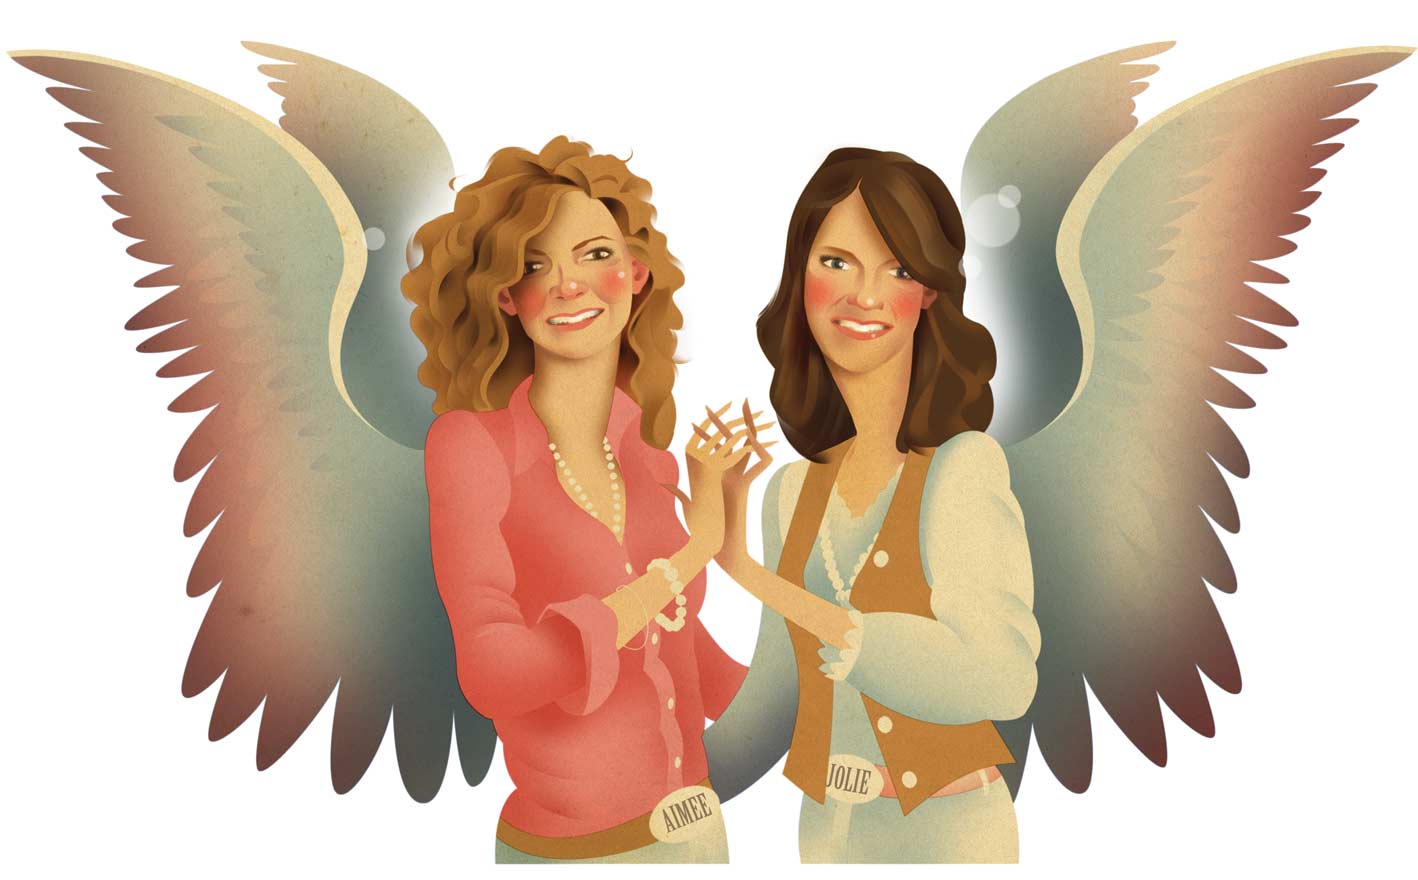 Illustration of Aimee and Jolie Sikes